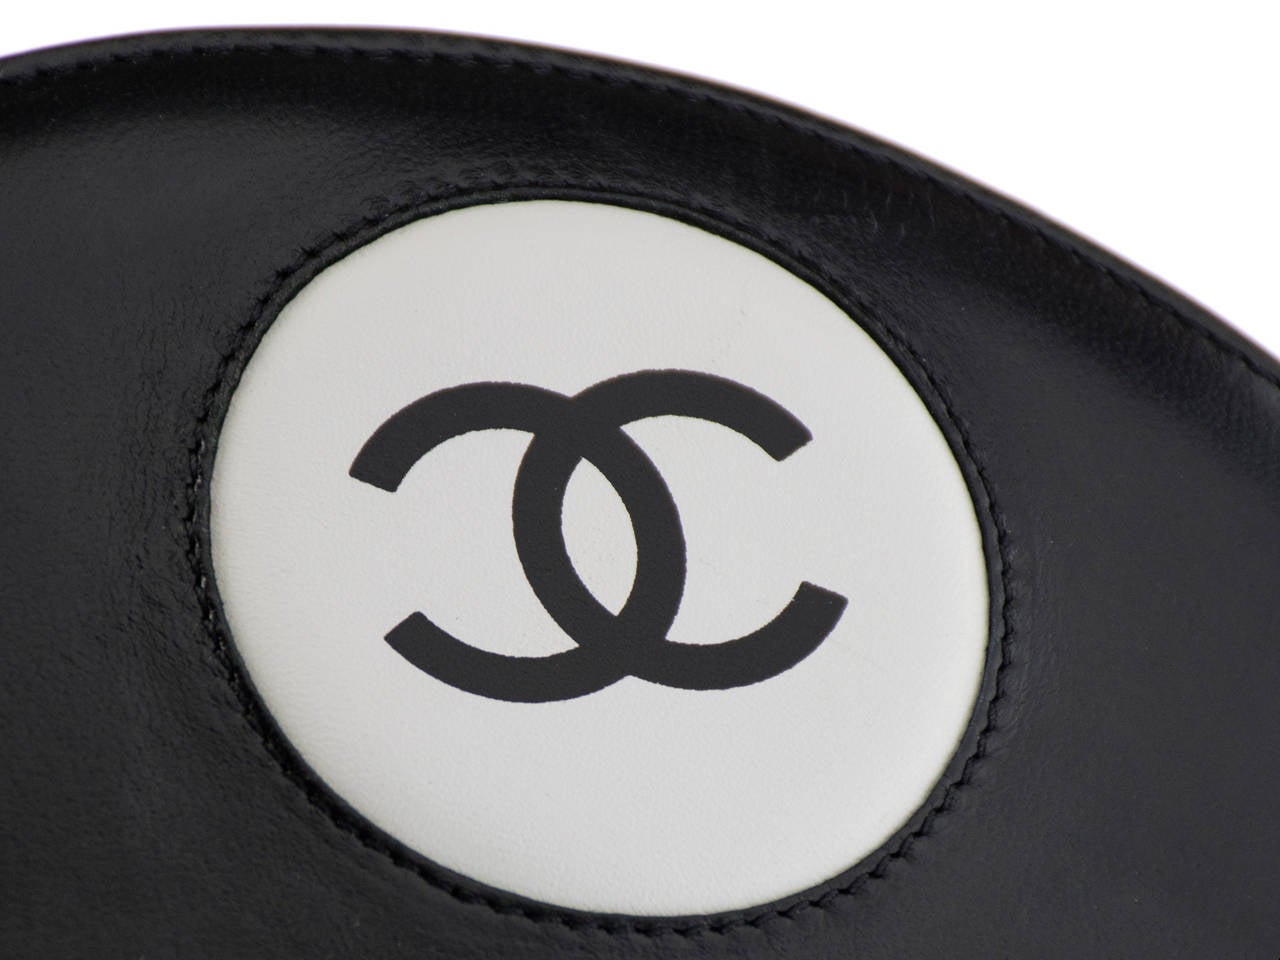 Chanel Rare Vintage Ying Yang Bag In Excellent Condition For Sale In San Diego, CA